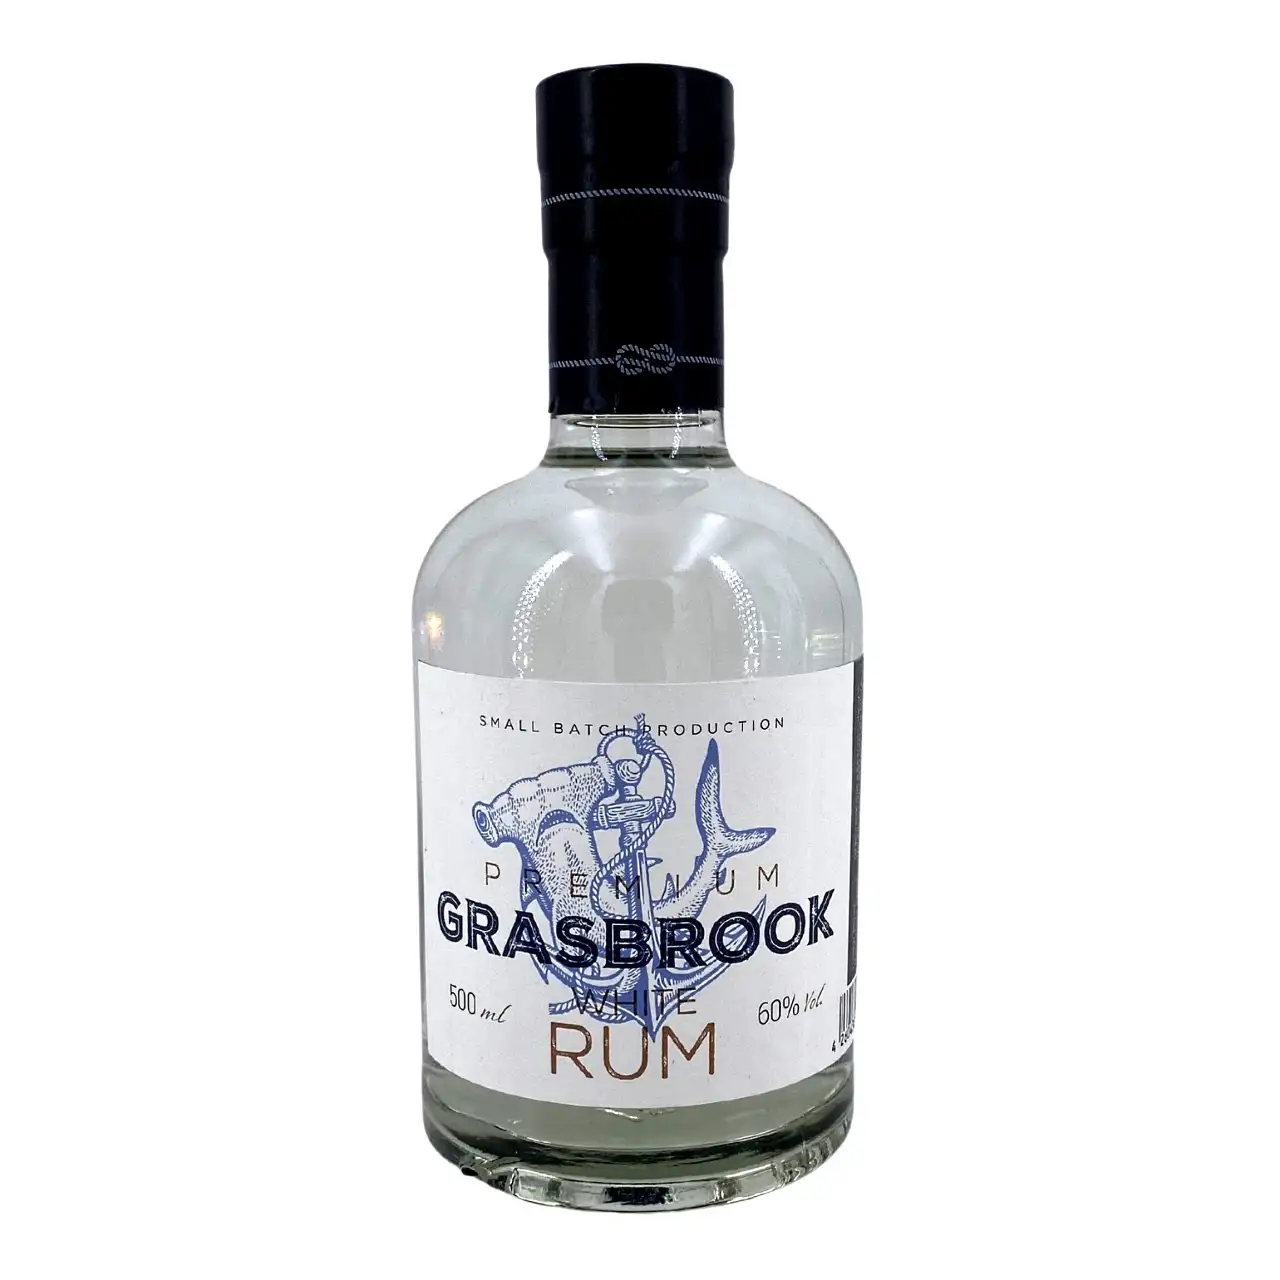 Image of the front of the bottle of the rum Grasbrook White